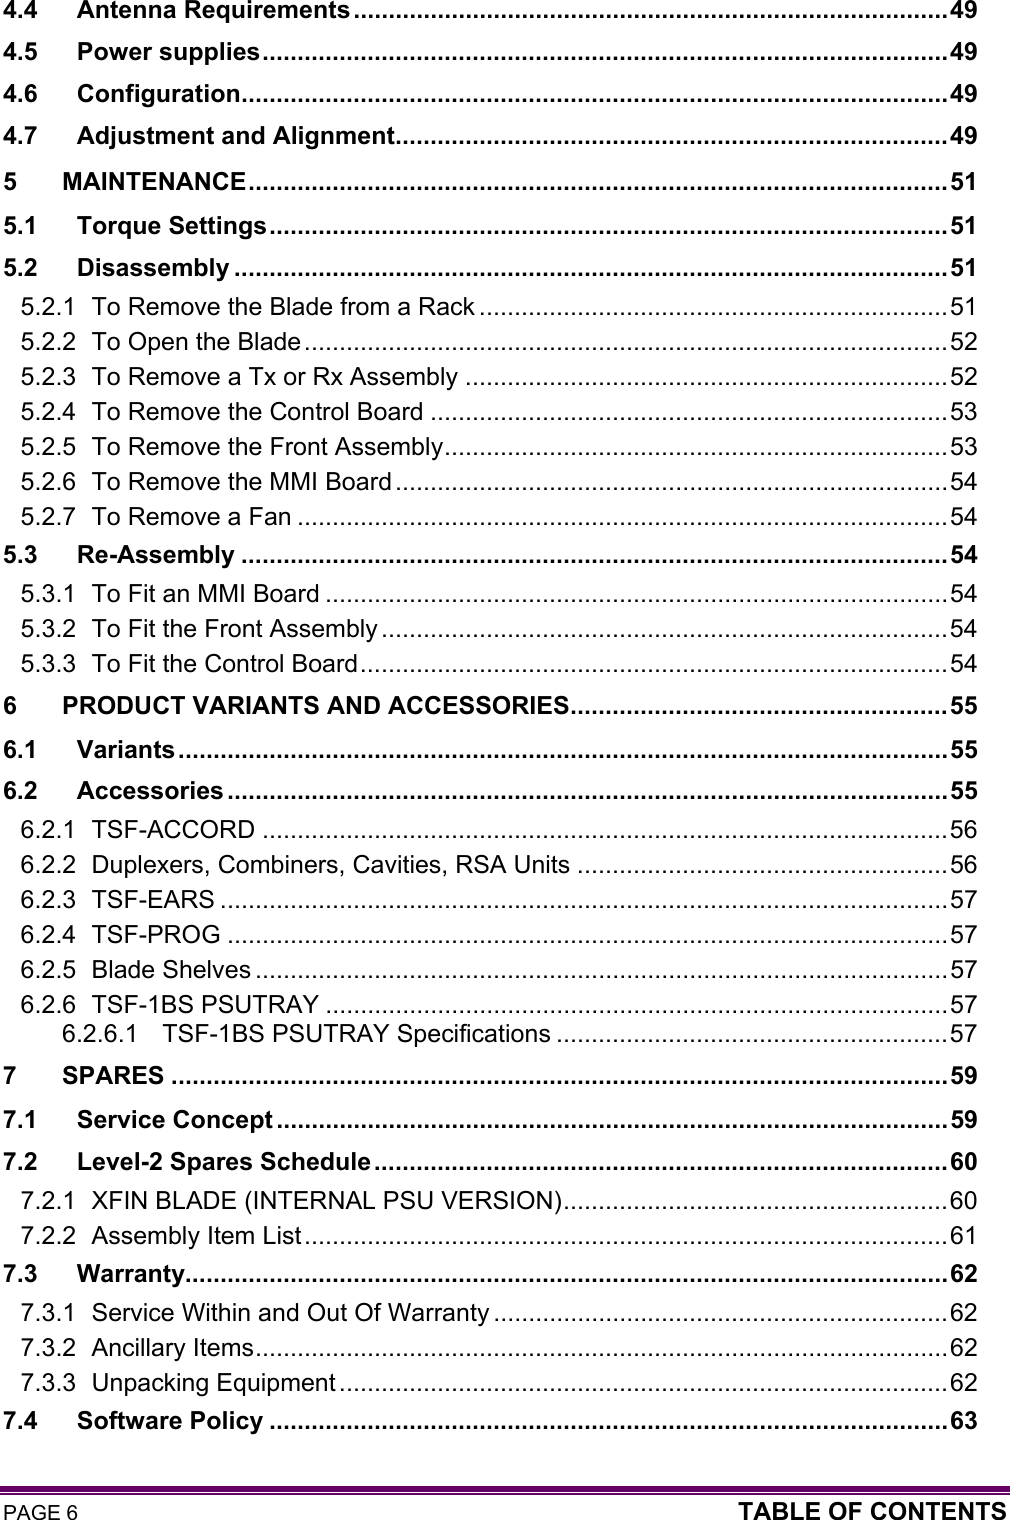 PAGE 6  TABLE OF CONTENTS  4.4 Antenna Requirements.....................................................................................49 4.5 Power supplies..................................................................................................49 4.6 Configuration.....................................................................................................49 4.7 Adjustment and Alignment...............................................................................49 5 MAINTENANCE....................................................................................................51 5.1 Torque Settings.................................................................................................51 5.2 Disassembly ......................................................................................................51 5.2.1 To Remove the Blade from a Rack ...................................................................51 5.2.2 To Open the Blade............................................................................................52 5.2.3 To Remove a Tx or Rx Assembly .....................................................................52 5.2.4 To Remove the Control Board ..........................................................................53 5.2.5 To Remove the Front Assembly........................................................................53 5.2.6 To Remove the MMI Board...............................................................................54 5.2.7 To Remove a Fan .............................................................................................54 5.3 Re-Assembly .....................................................................................................54 5.3.1 To Fit an MMI Board .........................................................................................54 5.3.2 To Fit the Front Assembly .................................................................................54 5.3.3 To Fit the Control Board....................................................................................54 6 PRODUCT VARIANTS AND ACCESSORIES......................................................55 6.1 Variants..............................................................................................................55 6.2 Accessories .......................................................................................................55 6.2.1 TSF-ACCORD ..................................................................................................56 6.2.2 Duplexers, Combiners, Cavities, RSA Units .....................................................56 6.2.3 TSF-EARS ........................................................................................................57 6.2.4 TSF-PROG .......................................................................................................57 6.2.5 Blade Shelves ...................................................................................................57 6.2.6 TSF-1BS PSUTRAY .........................................................................................57 6.2.6.1 TSF-1BS PSUTRAY Specifications ........................................................57 7 SPARES ...............................................................................................................59 7.1 Service Concept ................................................................................................59 7.2 Level-2 Spares Schedule..................................................................................60 7.2.1 XFIN BLADE (INTERNAL PSU VERSION).......................................................60 7.2.2 Assembly Item List............................................................................................61 7.3 Warranty.............................................................................................................62 7.3.1 Service Within and Out Of Warranty .................................................................62 7.3.2 Ancillary Items...................................................................................................62 7.3.3 Unpacking Equipment .......................................................................................62 7.4 Software Policy .................................................................................................63 